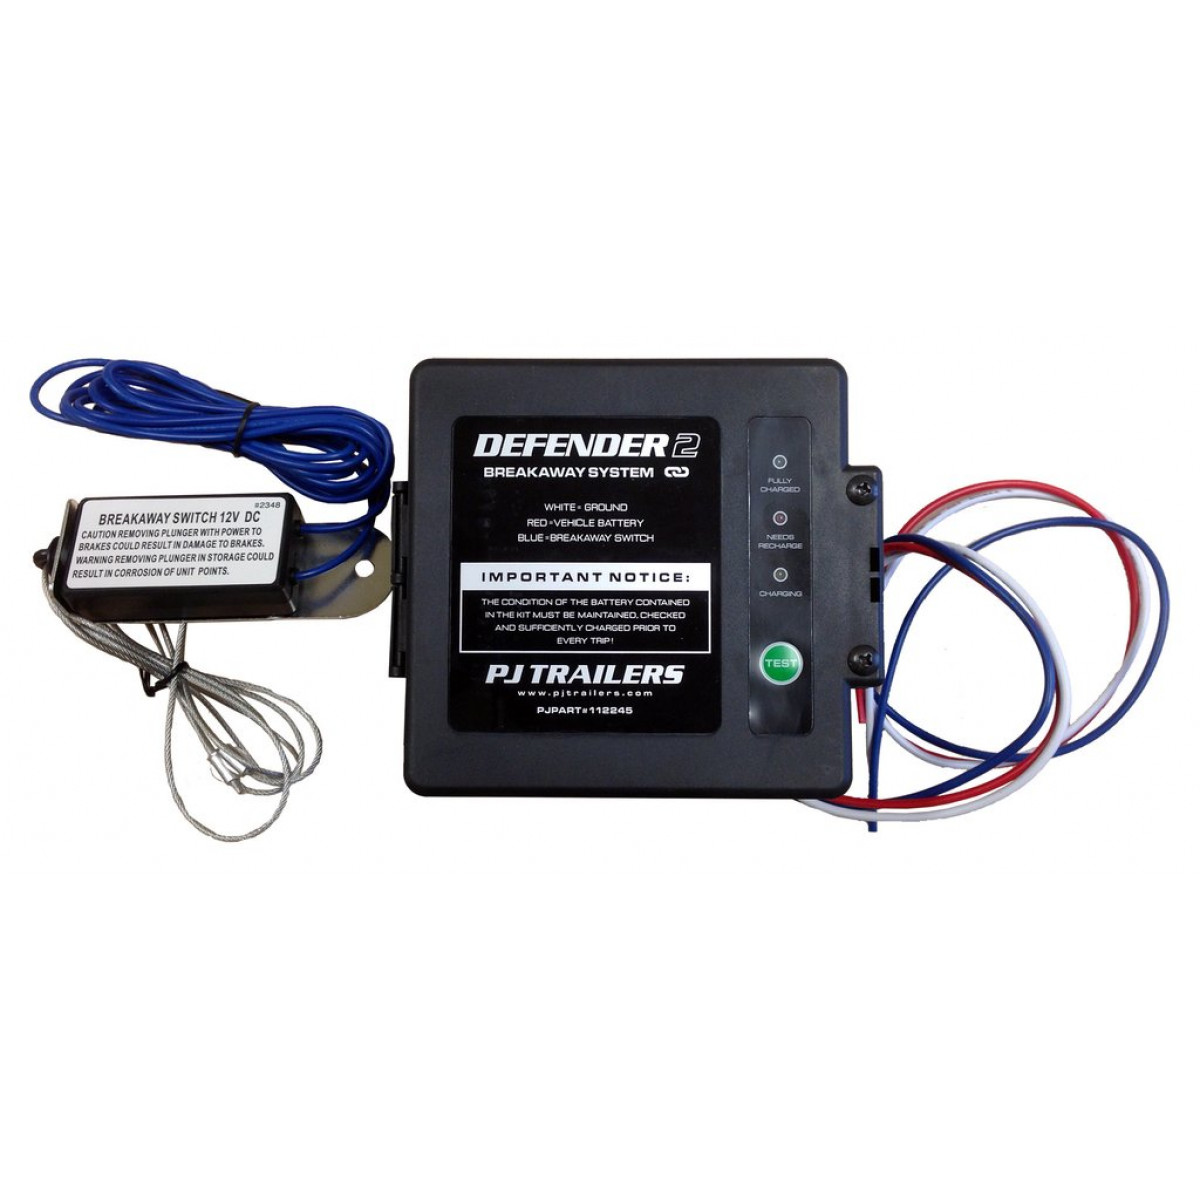 Pj Trailer Battery Charger Off 69